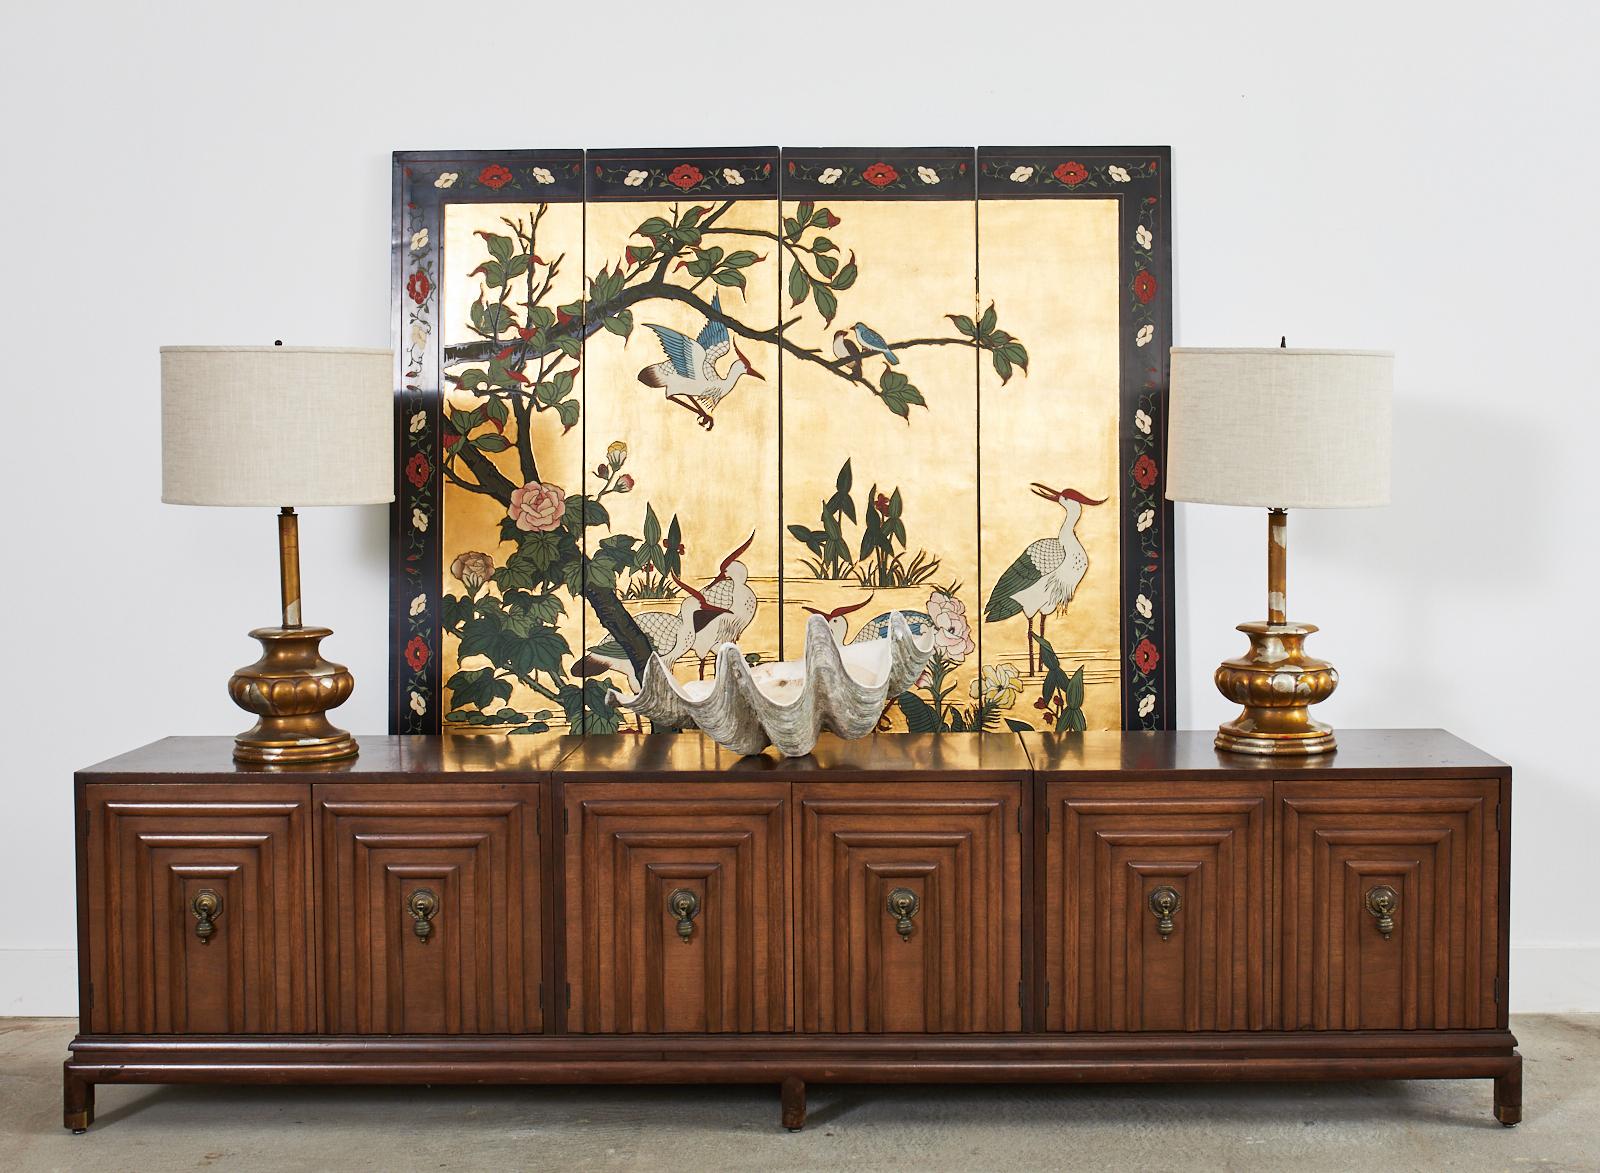 Dazzling Chinese export lacquered four-panel coromandel screen featuring a flora and fauna waterscape with stylized cranes. The carved lacquer panels are embellished with vivid colors of natural pigments on an amazing gold leaf square ground. The